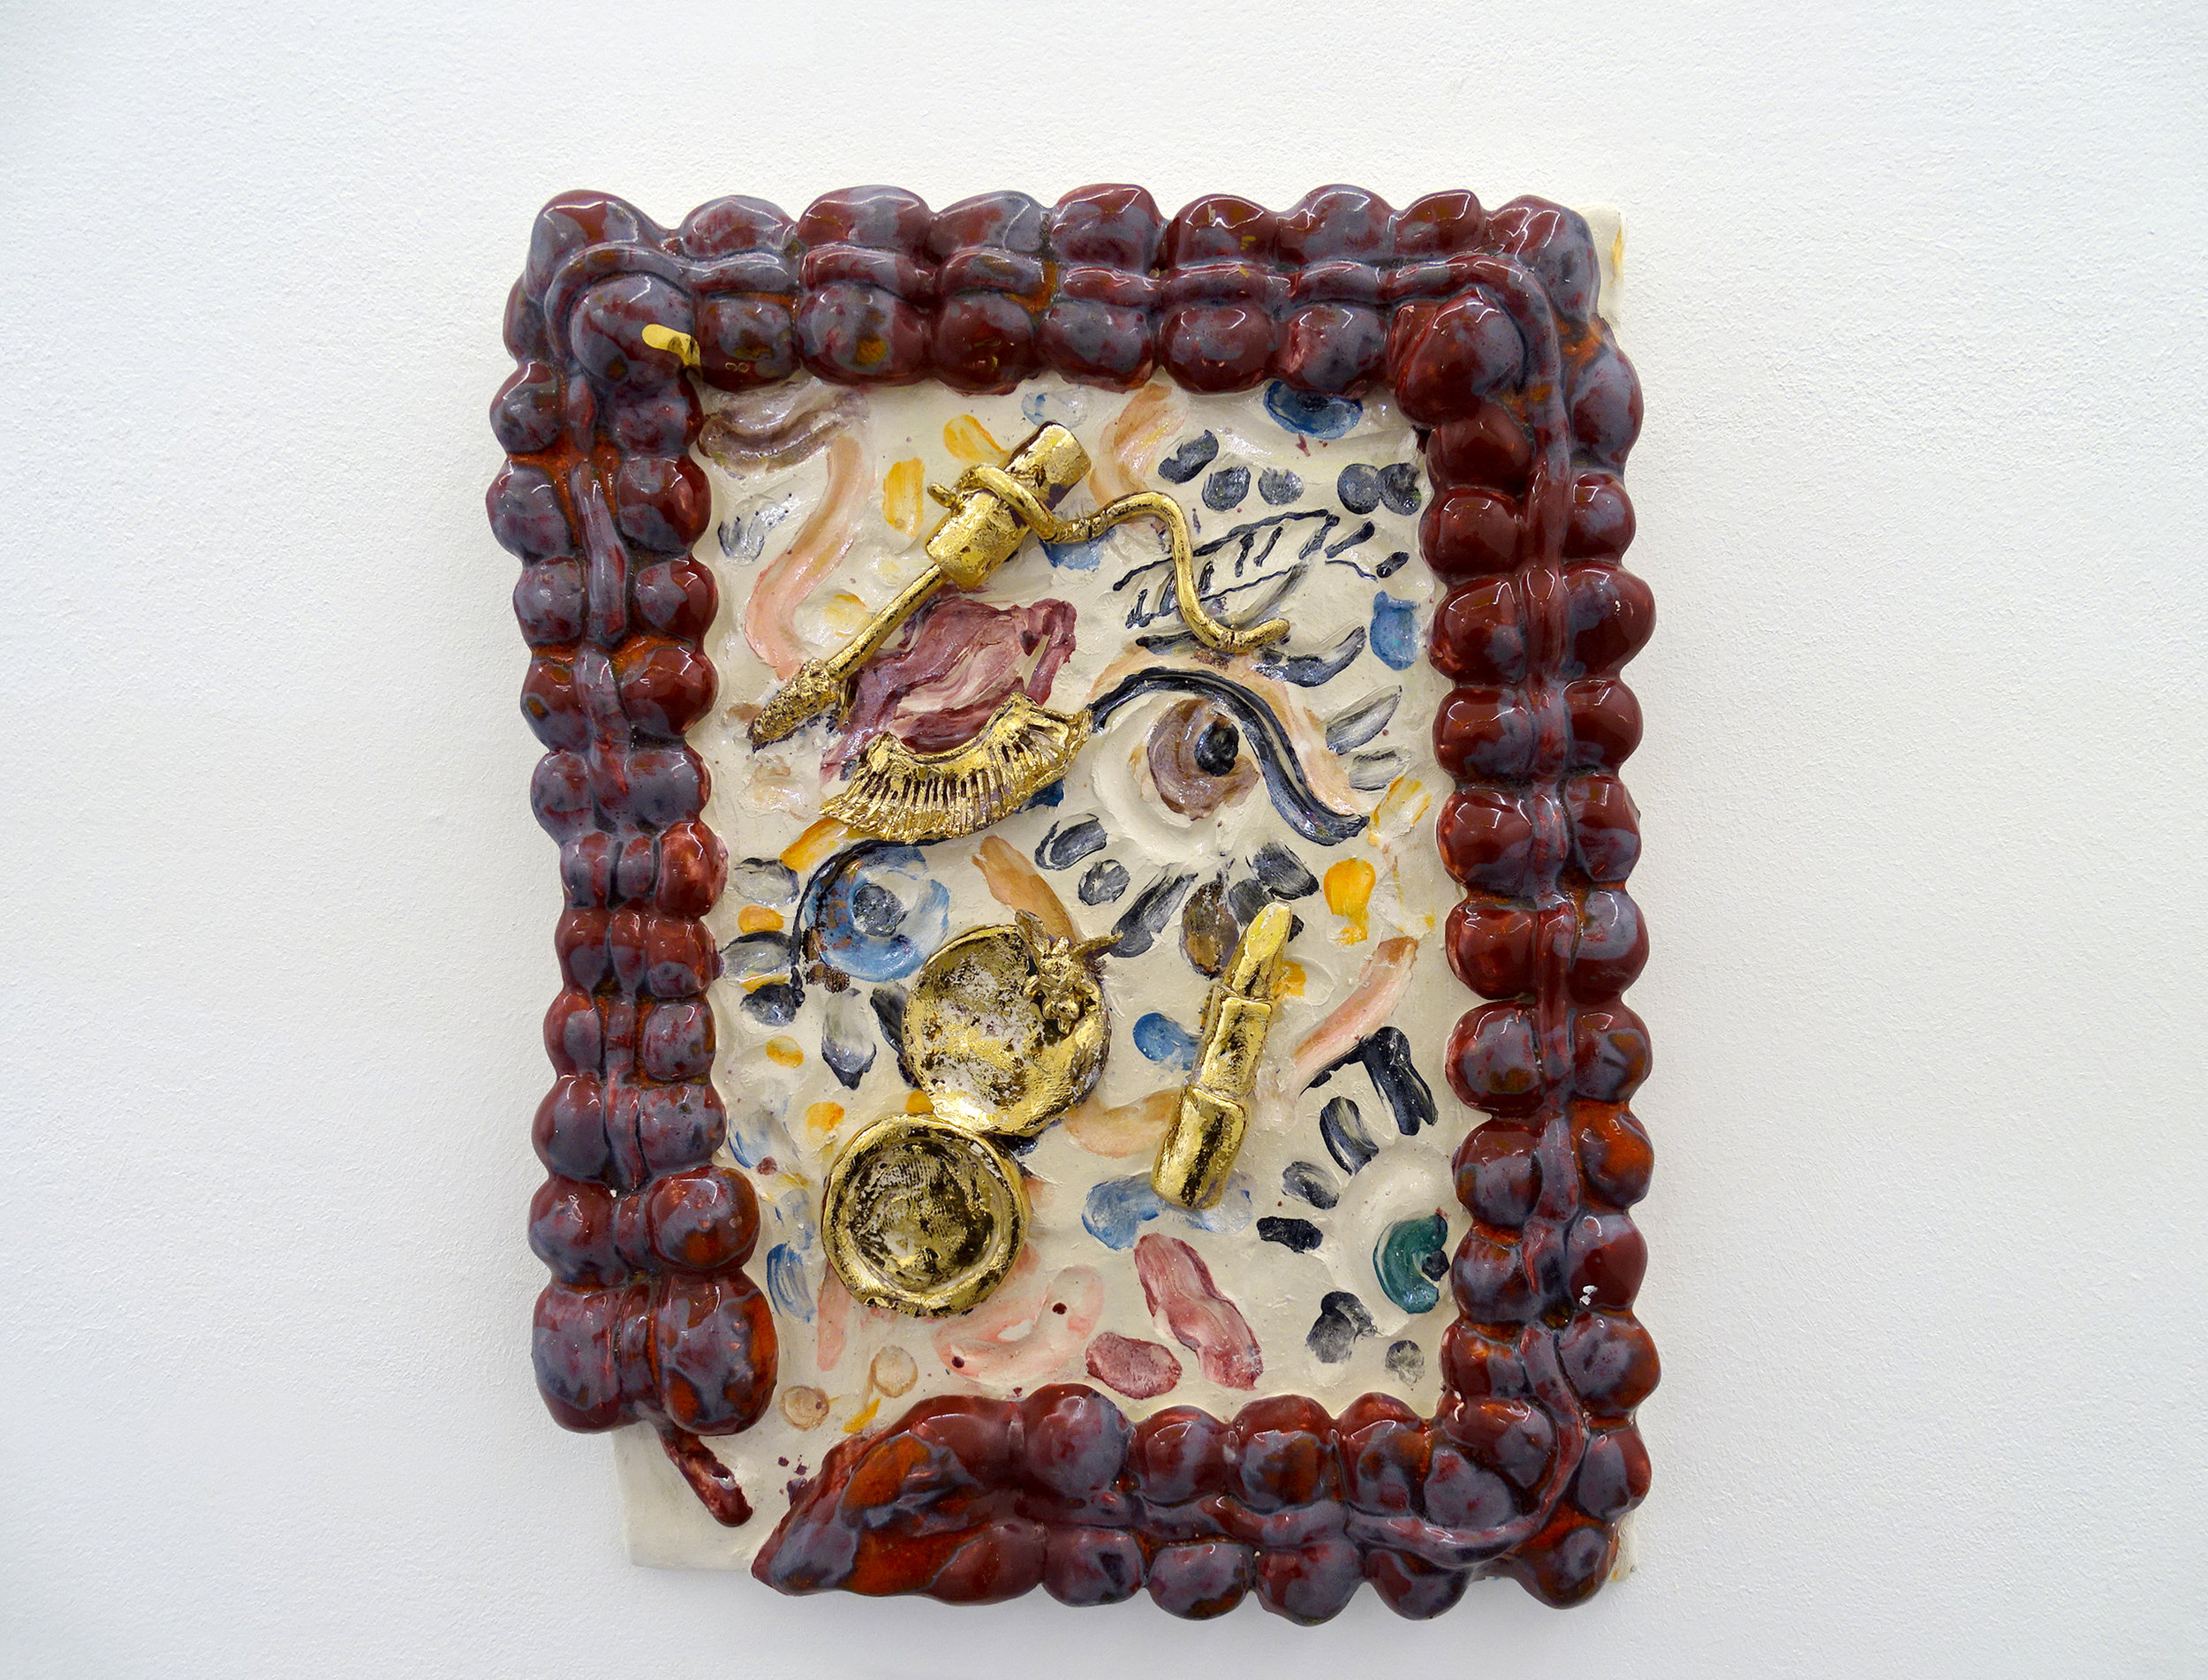 (20) Of All the Things I’ve Lost Proudick (Lindsey Mendick & Paloma Proudfoot) Hannah Barry Gallery at Ballon Rouge Club, Brussels  Lindsey Mendick Losing face, 2019 Glazed ceramic 39 x 29 x 3.5 cm   courtesy Hannah B.jpg